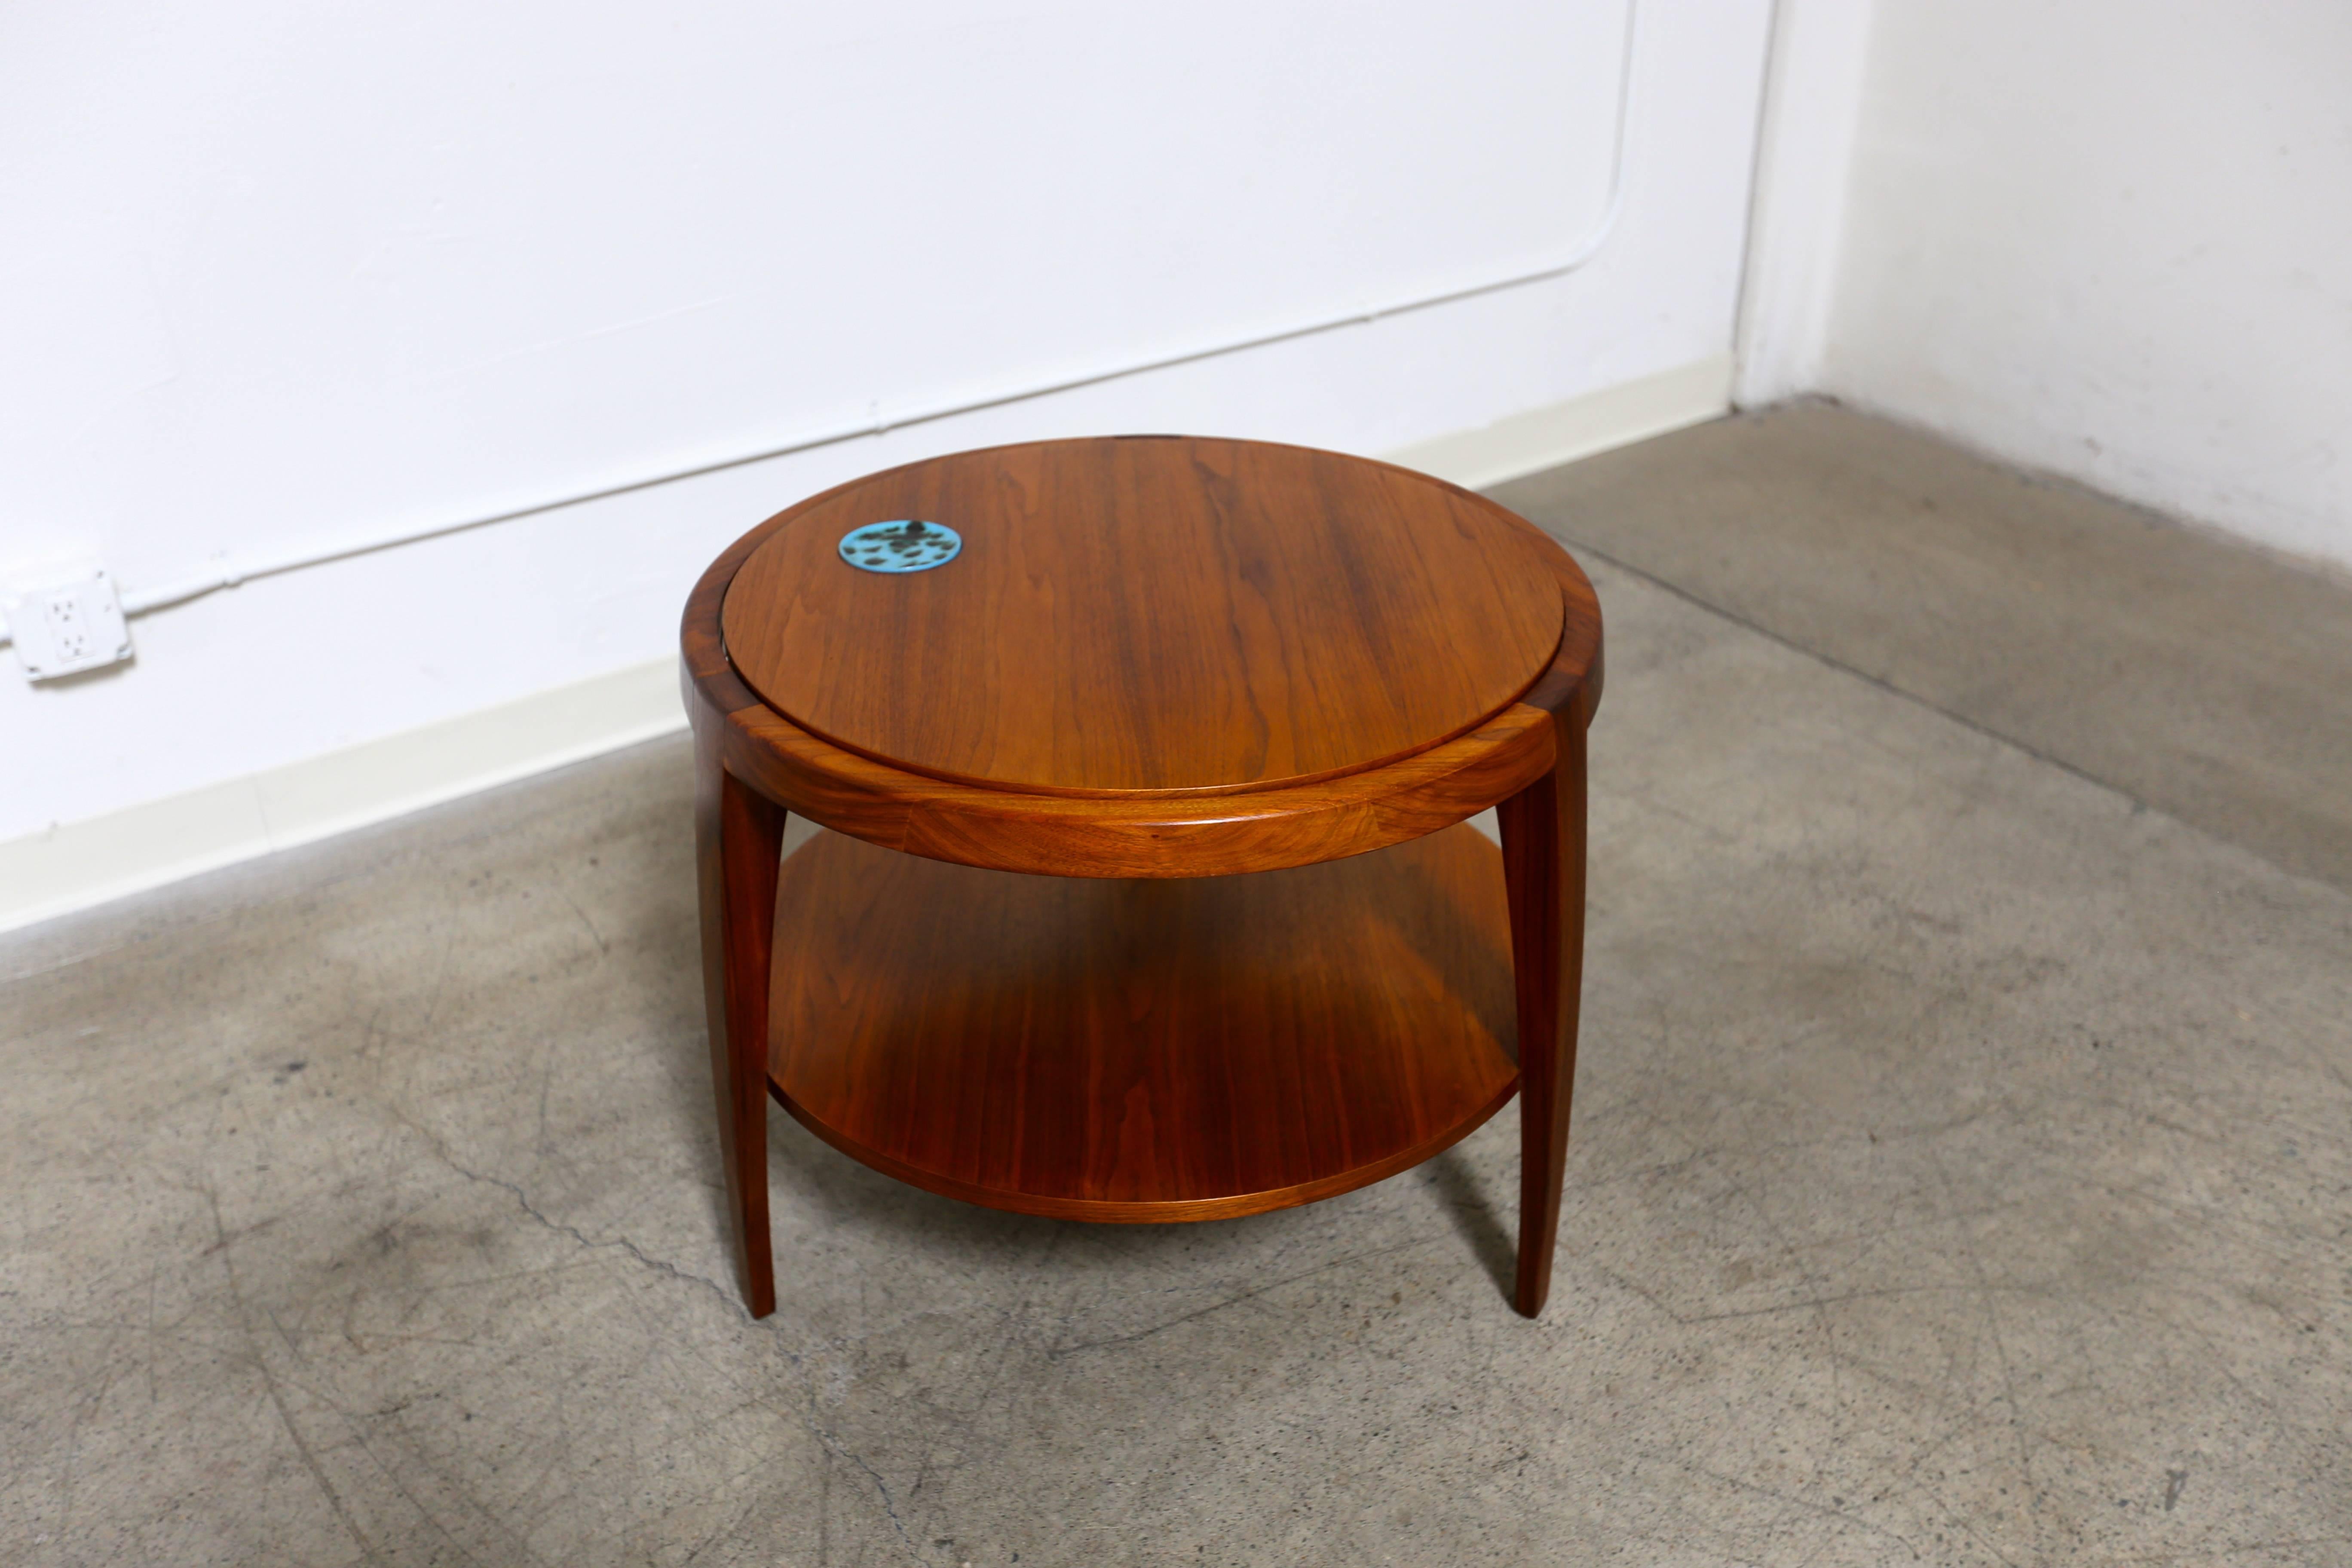 Rare occasional table by Edward Wormley with Natzler tile. The top on this piece rotates. The tabletop measures 28.5